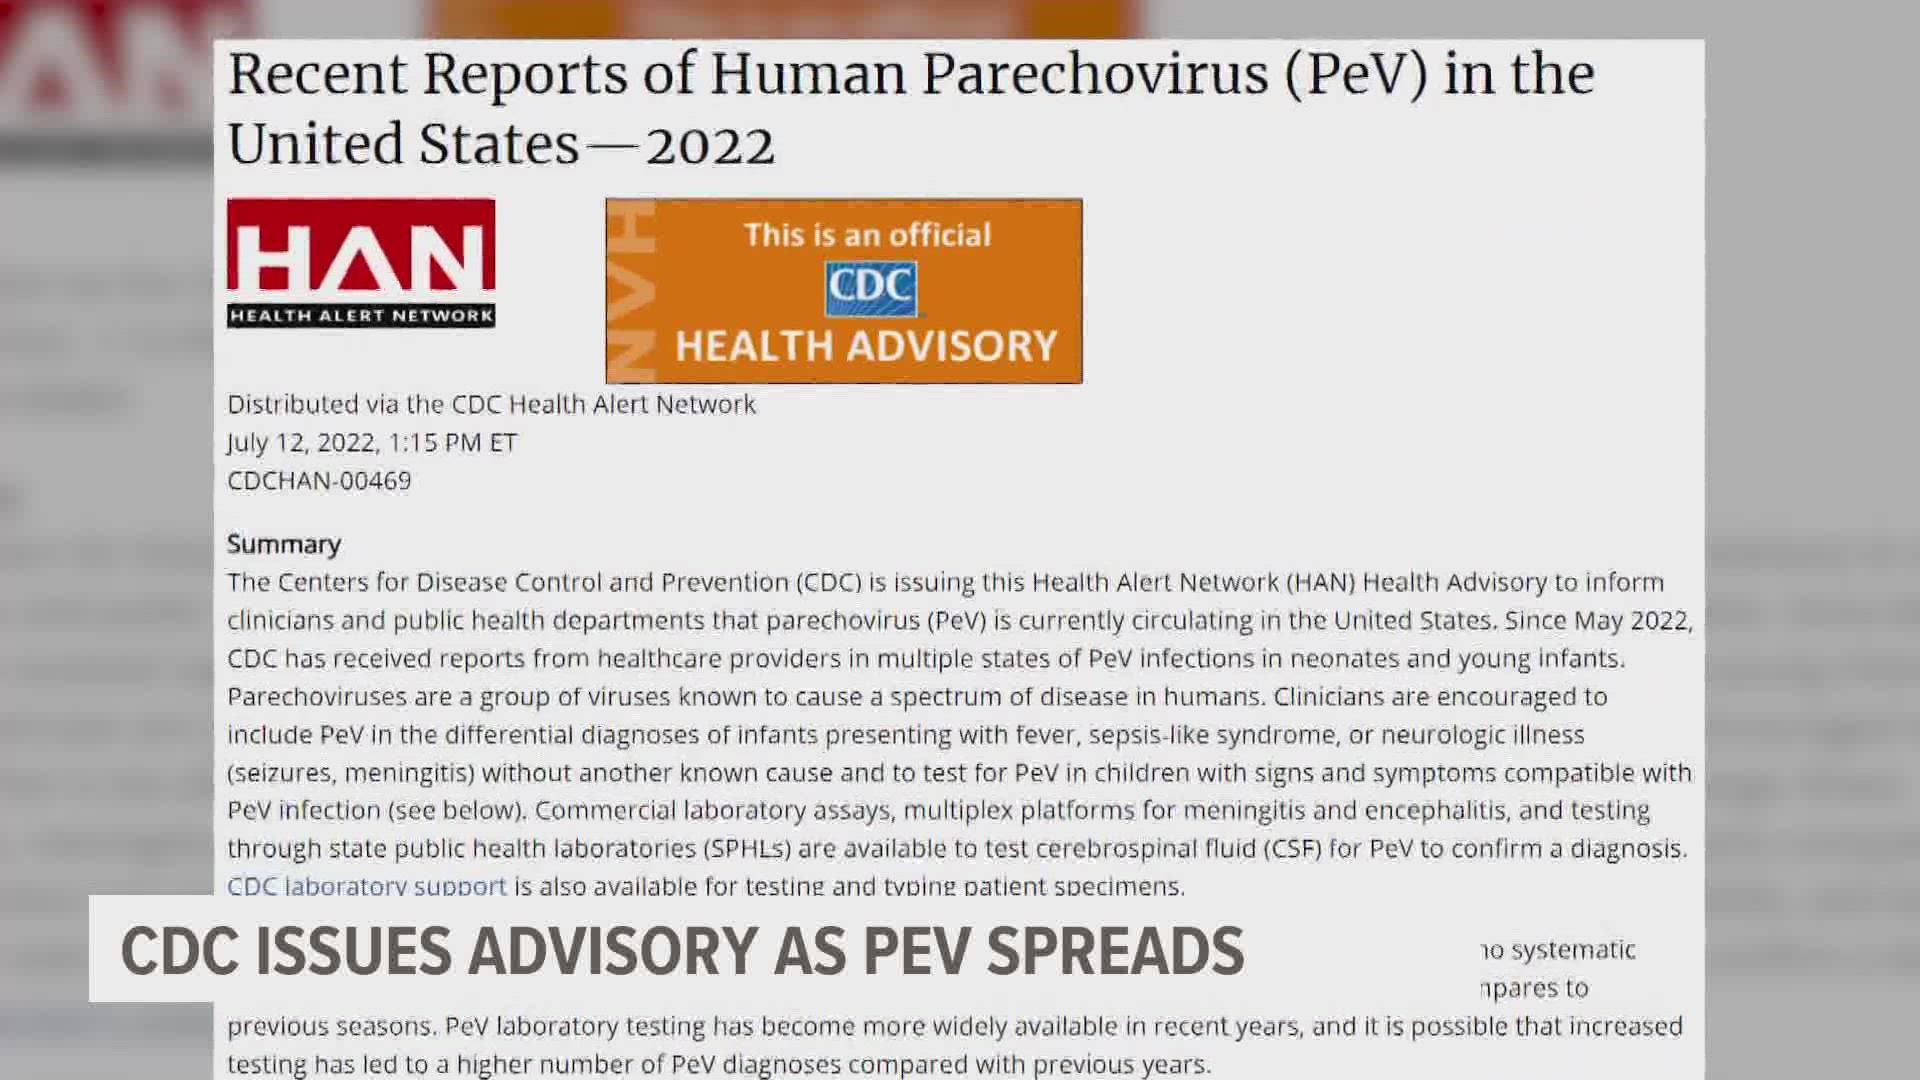 This summer the CDC issued a health advisory as Parechovirus spread.